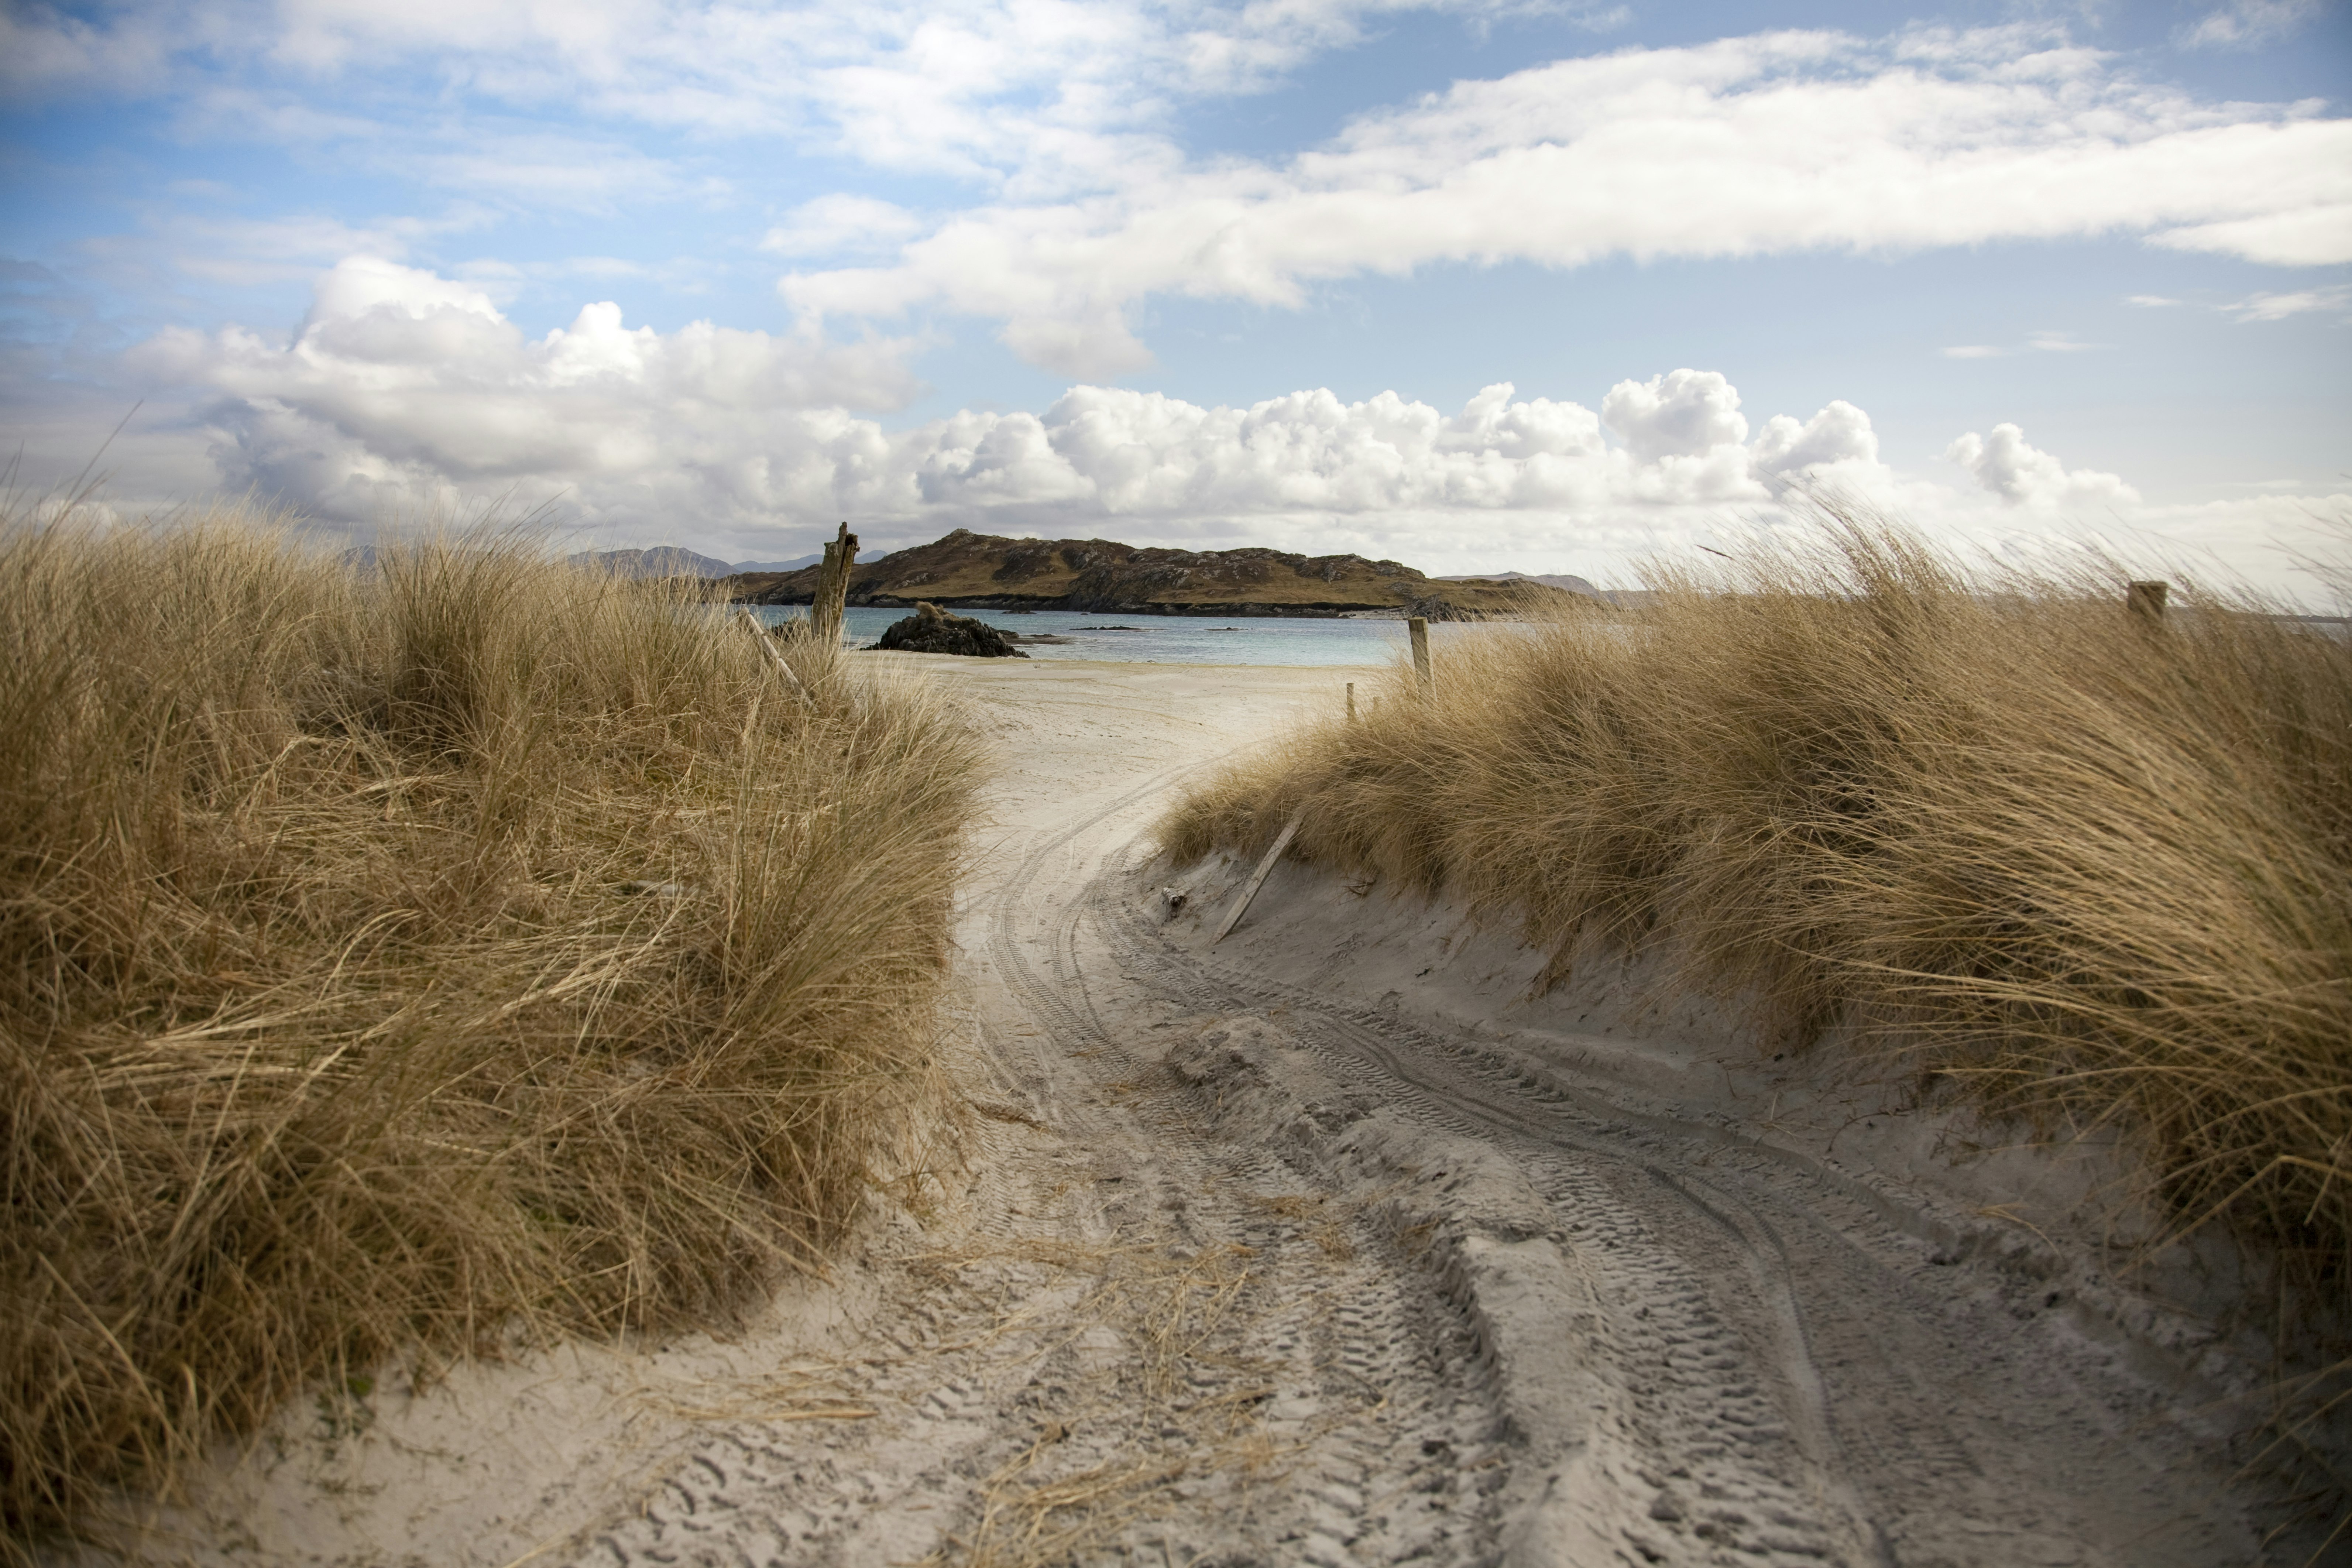 A sandy track surrounded by dry bushes leading to a beach.